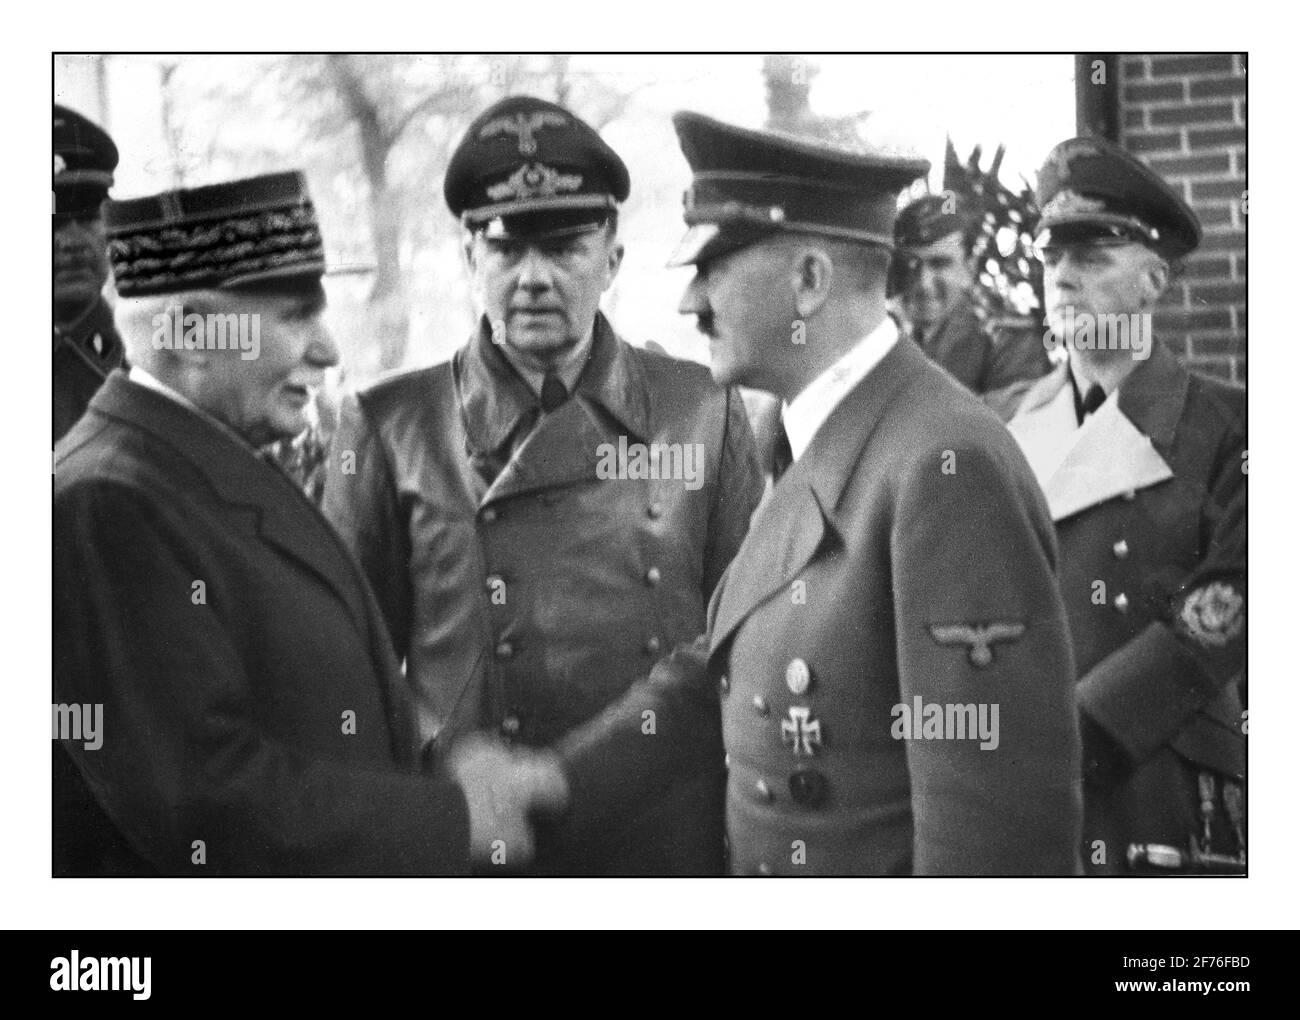 Hitler Petain World War II 1939-45 October 24, 1940 Adolf Hitler welcomes the French head of state Marshal Henry Philippe Petain in Montoire-sur-le-Loir. In the middle, Chief Interpreter, Envoy Dr. Paul Schmidt. On the right, Reich Foreign Minister Joachim von Ribbentrop. Stock Photo